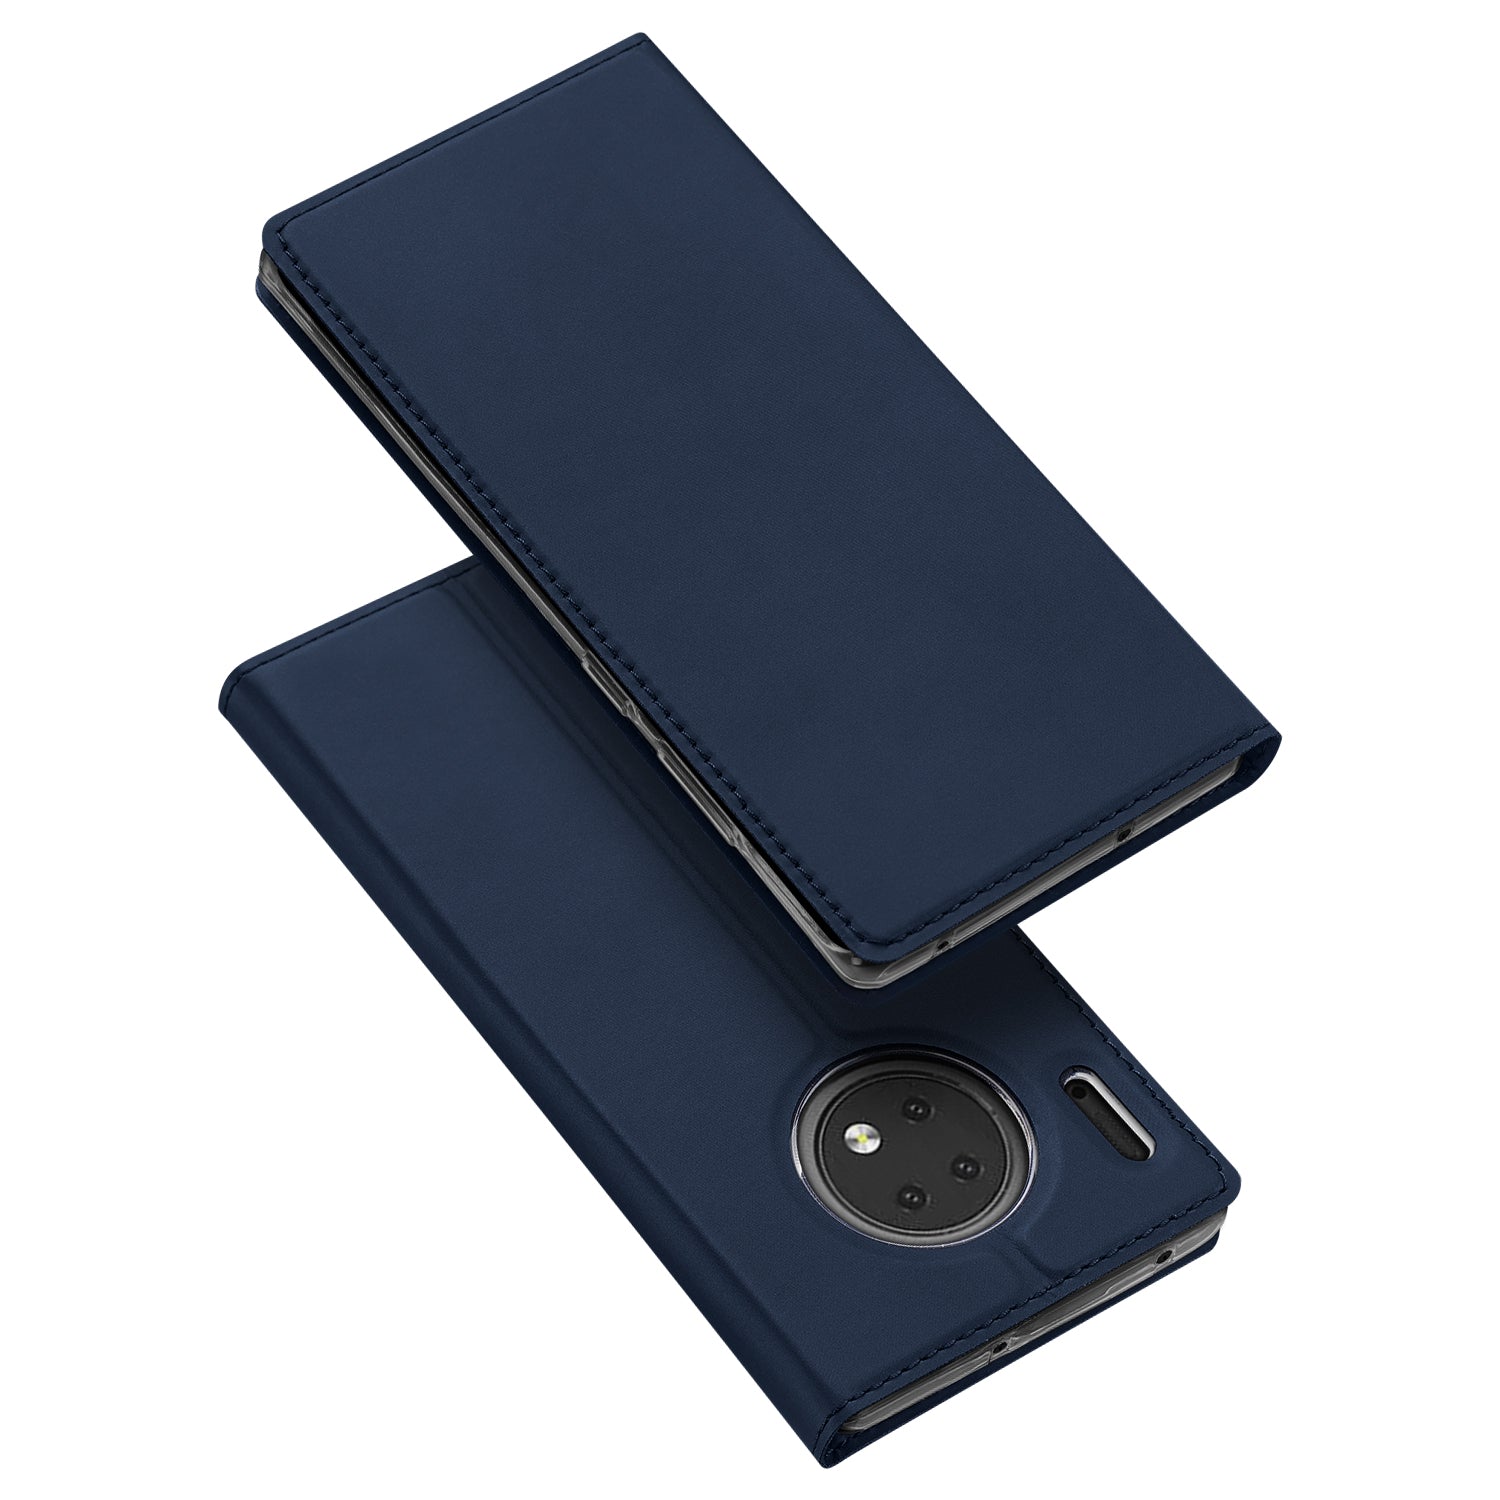 Huawei Mate 30 Cases, Covers &amp; Accessories